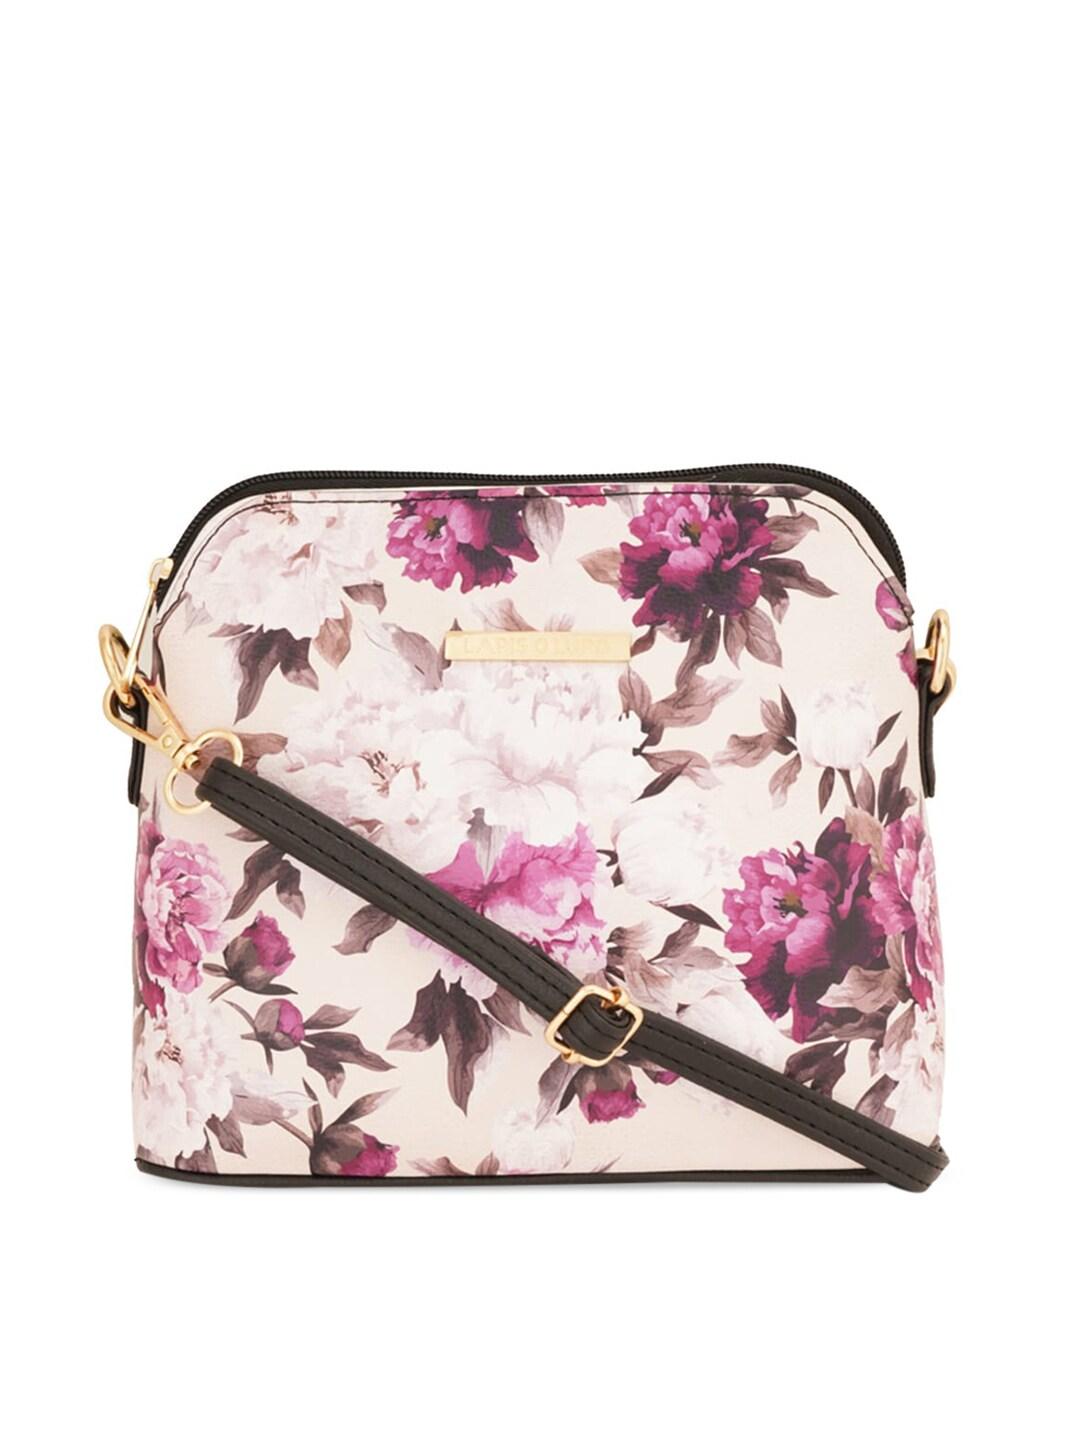 Lapis O Lupo Floral Printed Structured Sling Bag